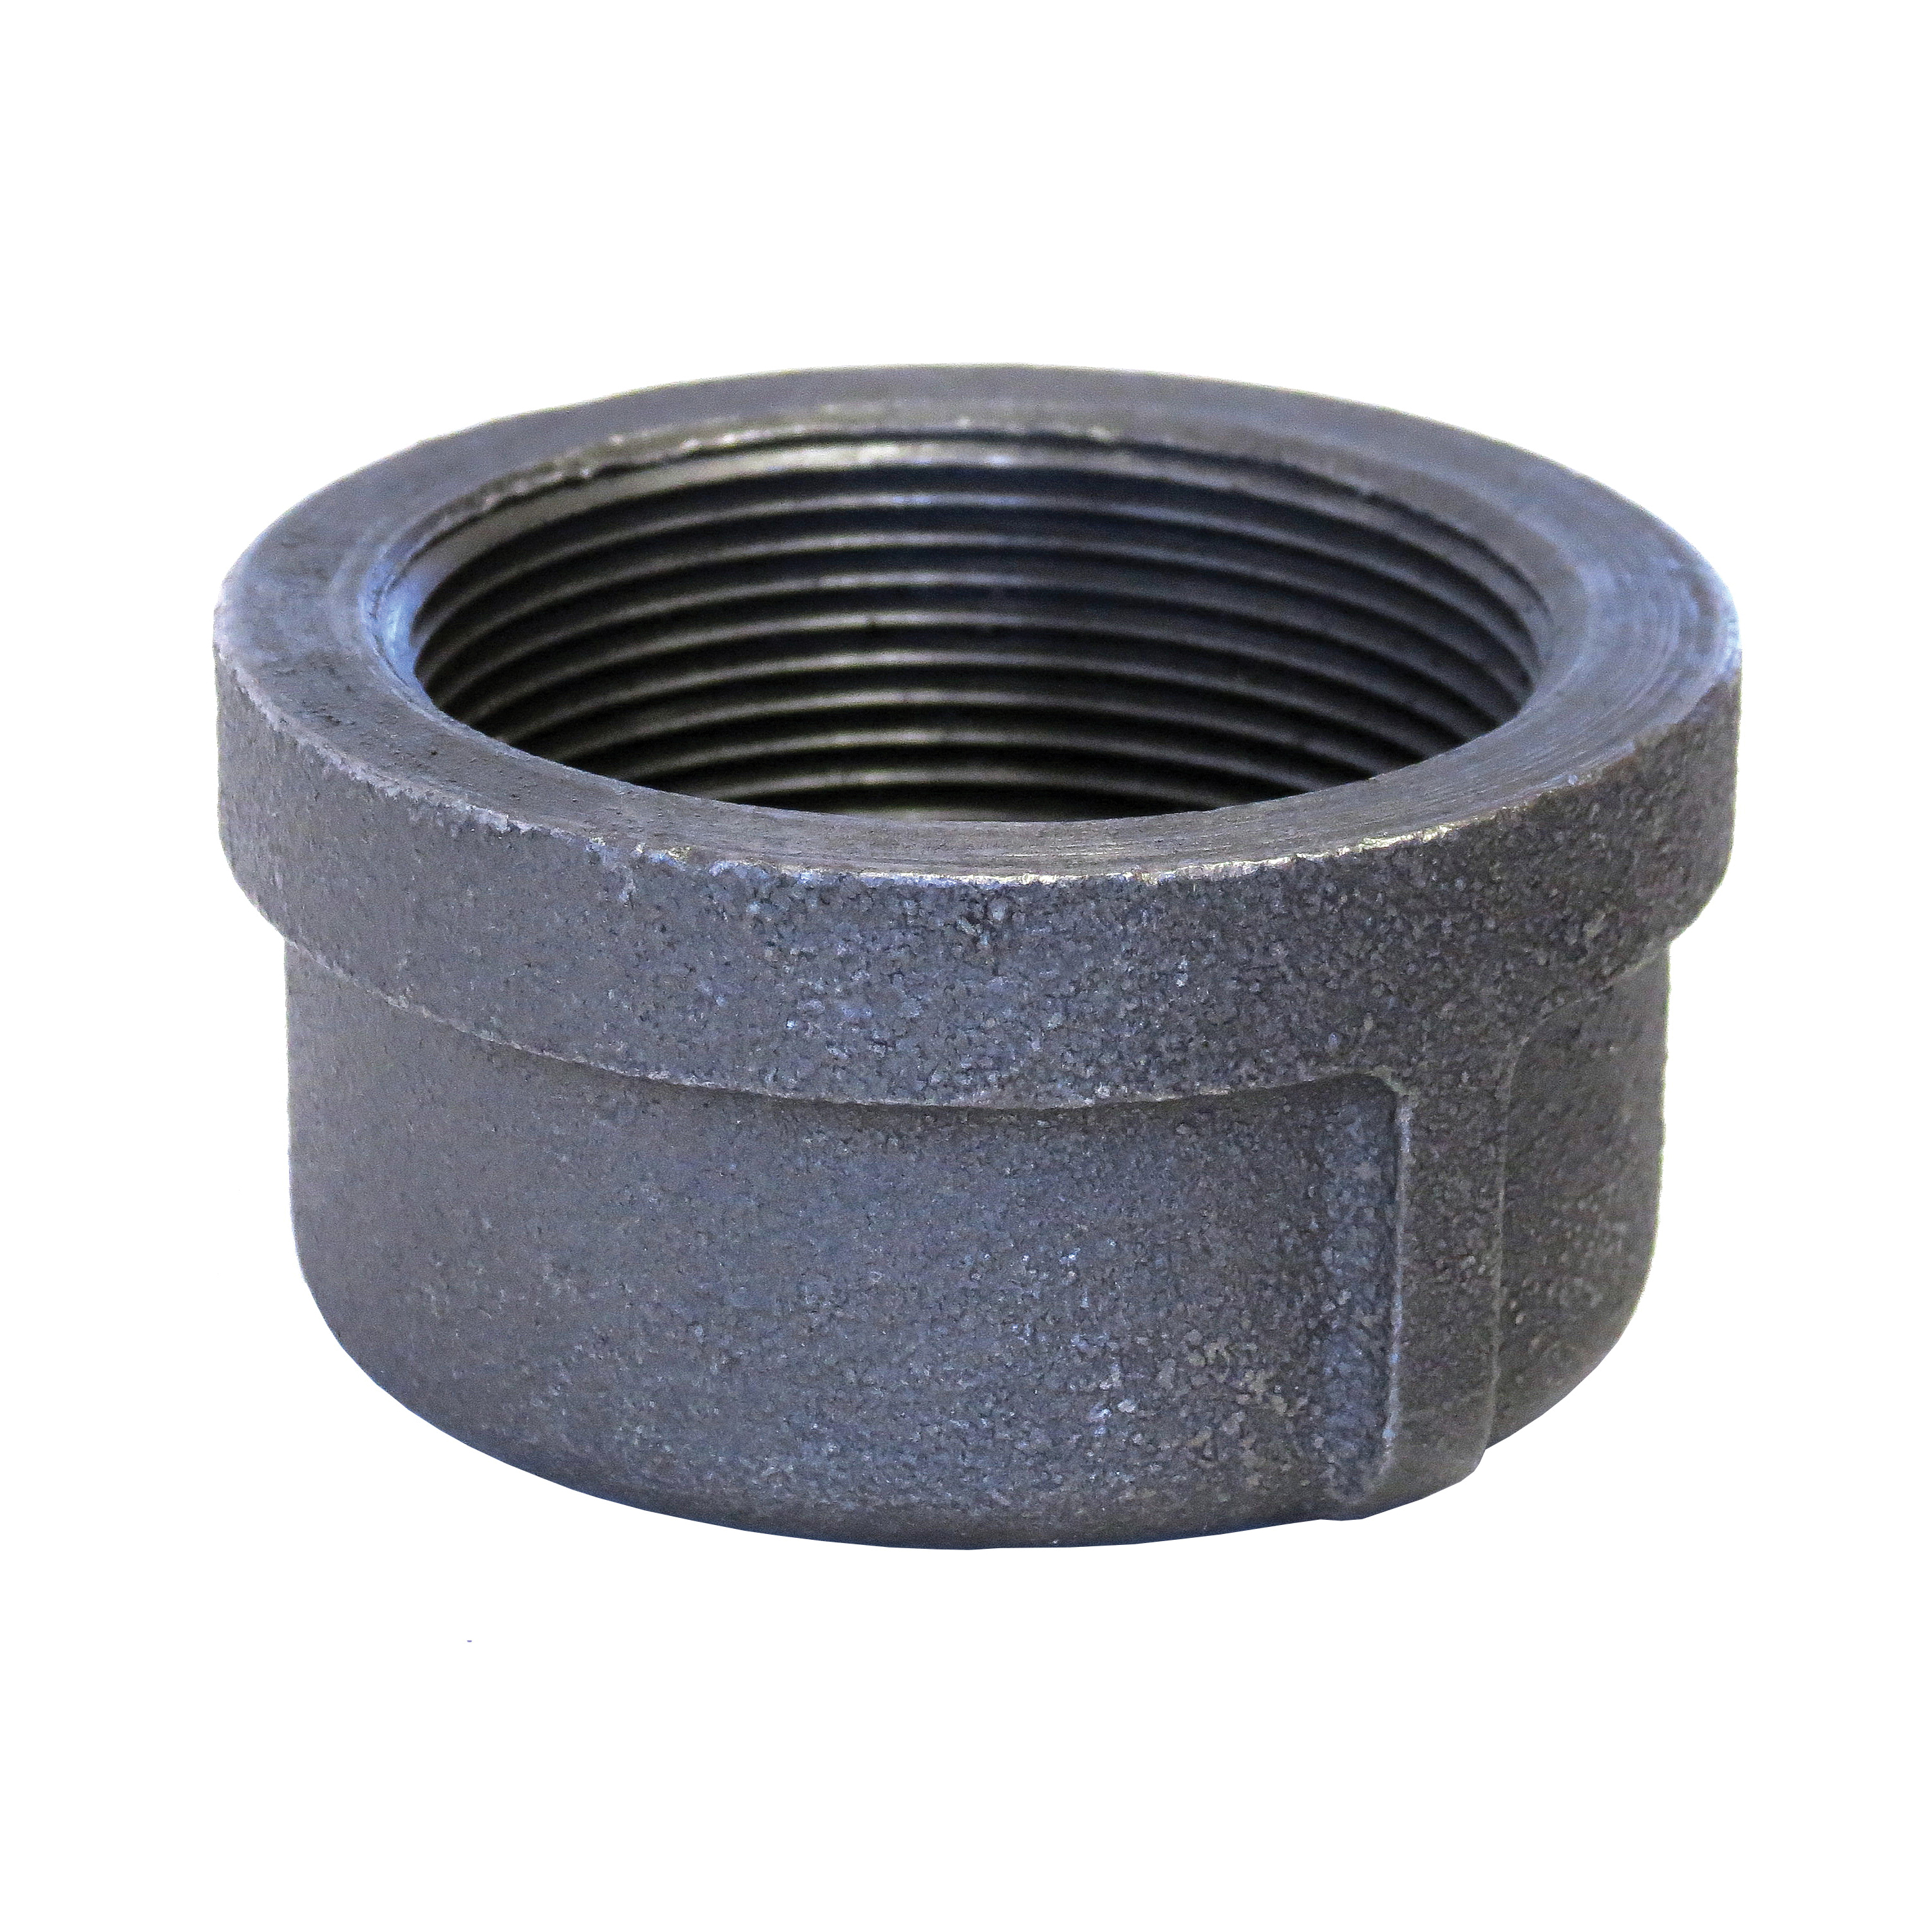 Anvil® 0319900684 FIG 1124 Standard Pipe Cap, 1-1/2 in Nominal, FNPT End Style, 150 lb, Malleable Iron, Galvanized, Domestic